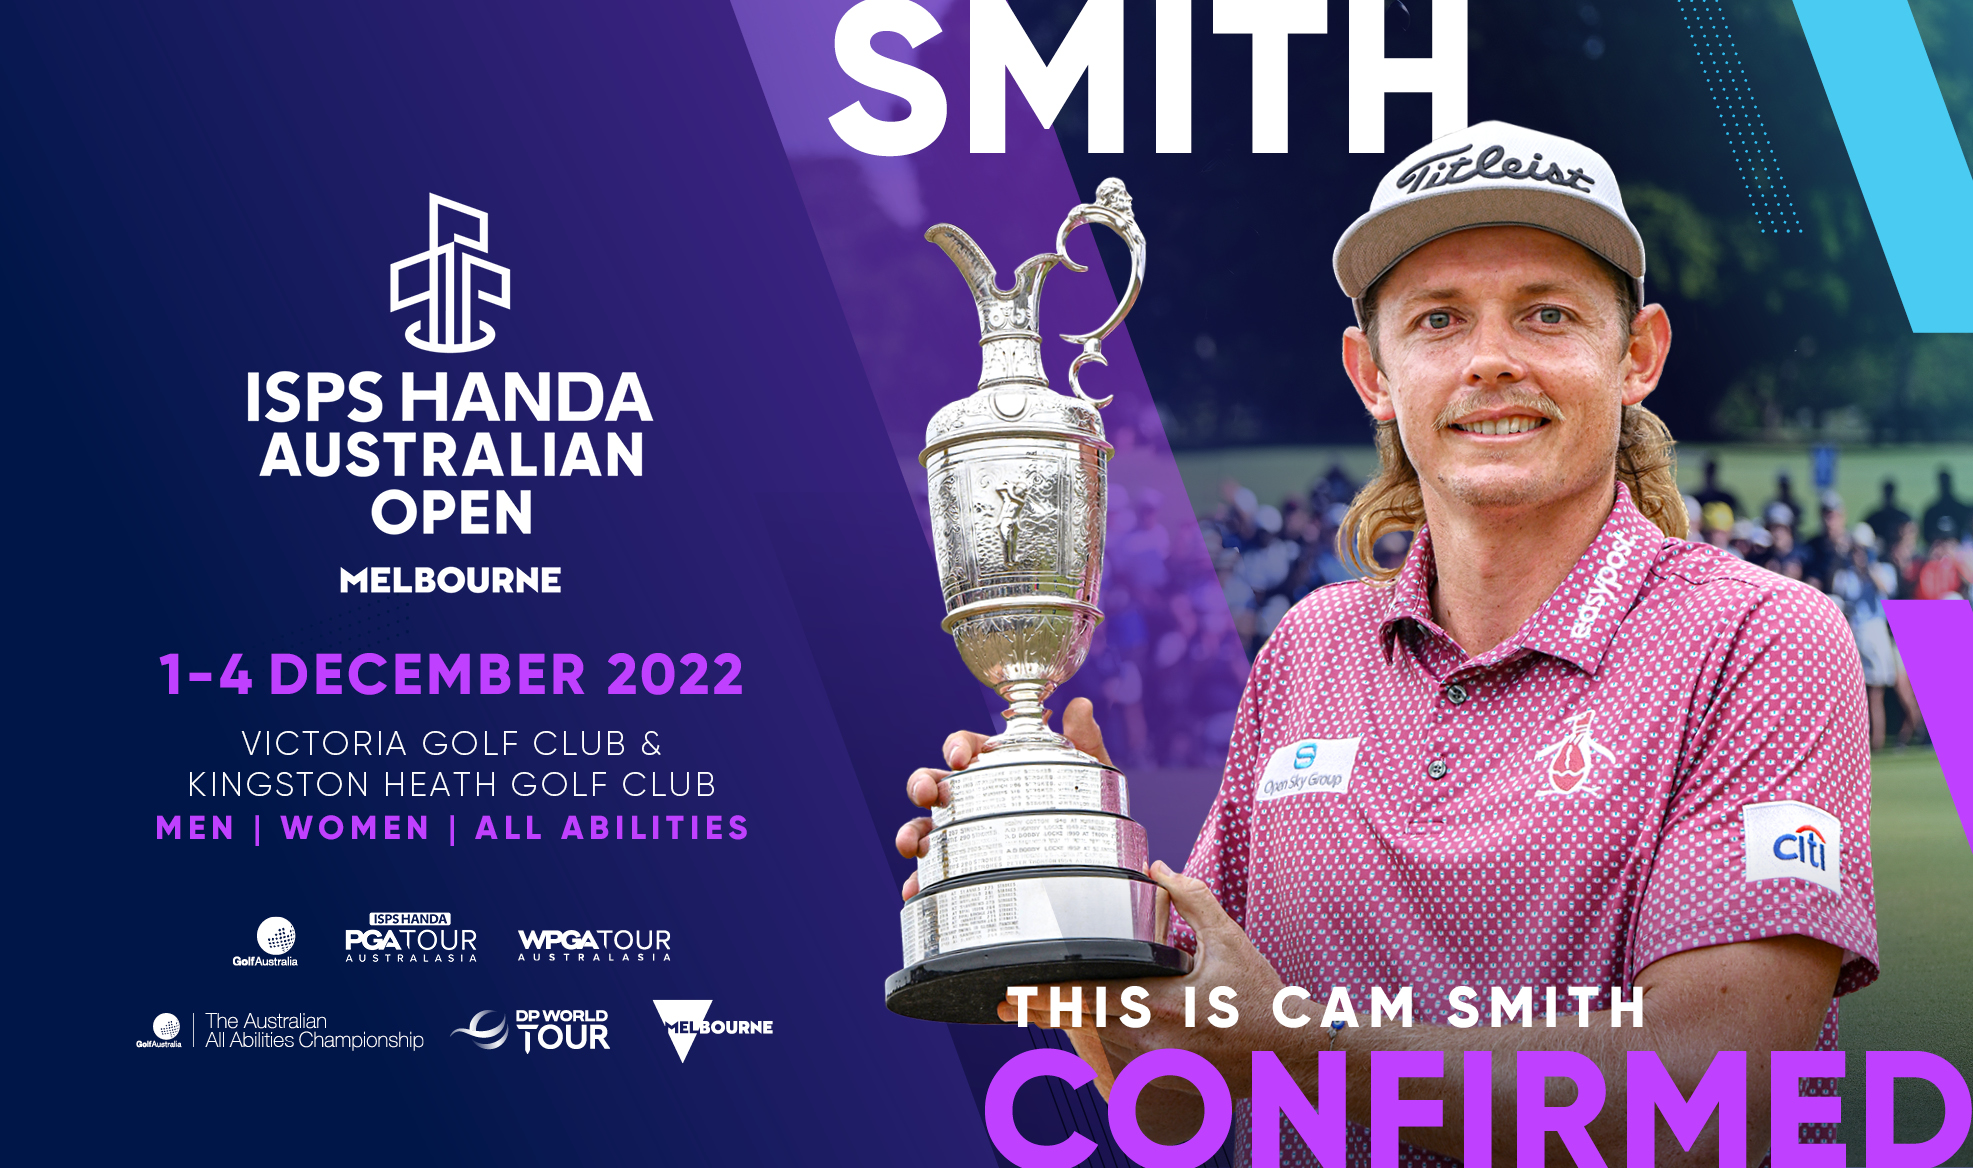 Smith in for Melbourne, Buhai makes it a pair of Open winners for ISPS